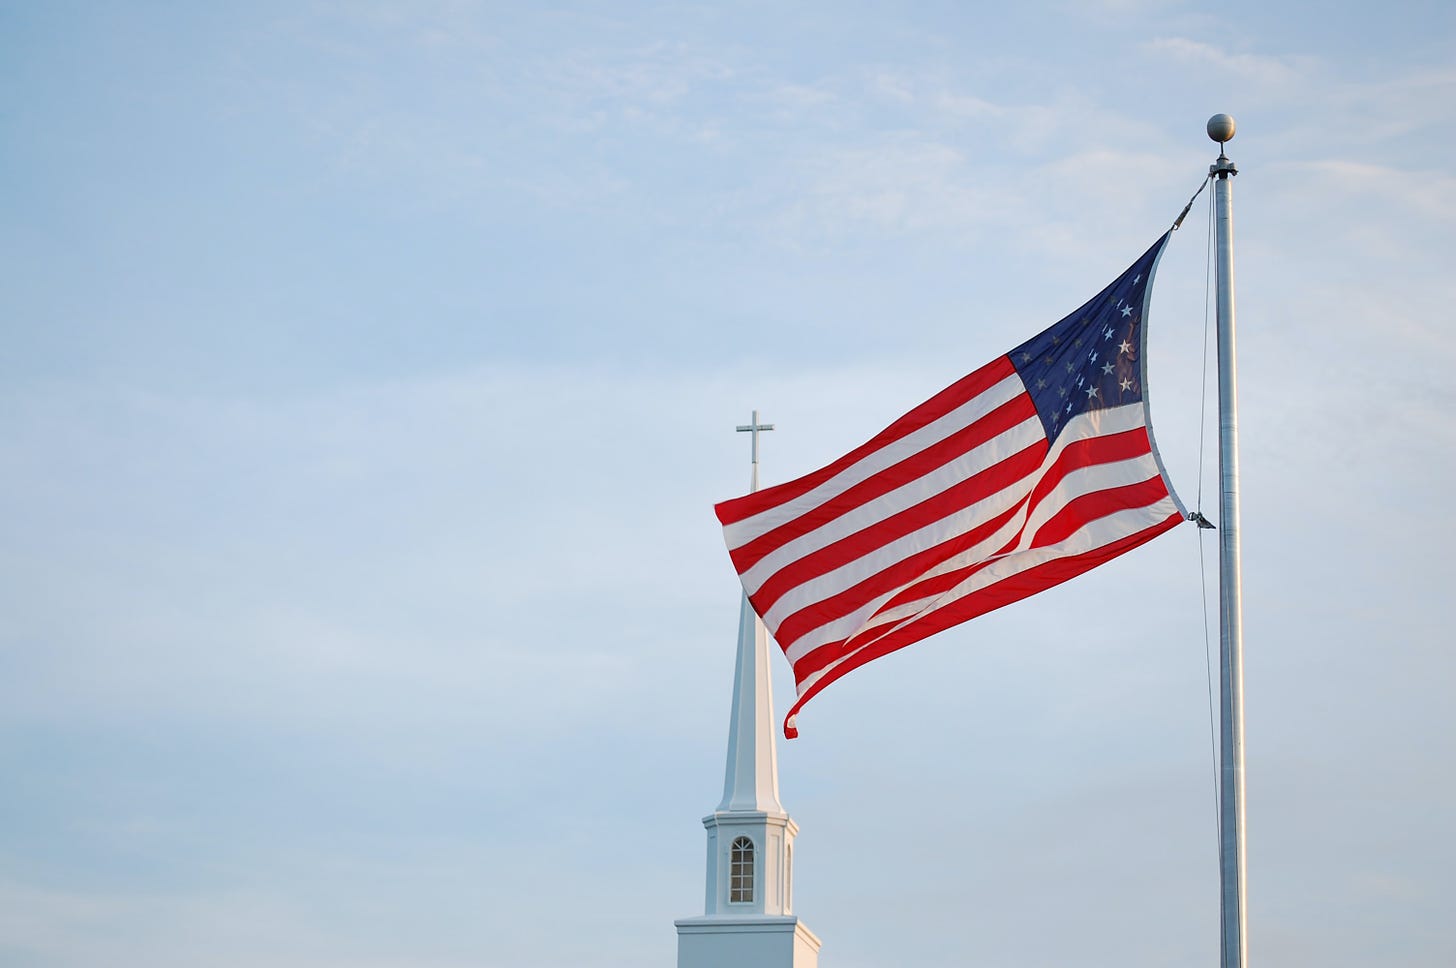 Blue sky background with american flag on flag pole and church steeple in foreground